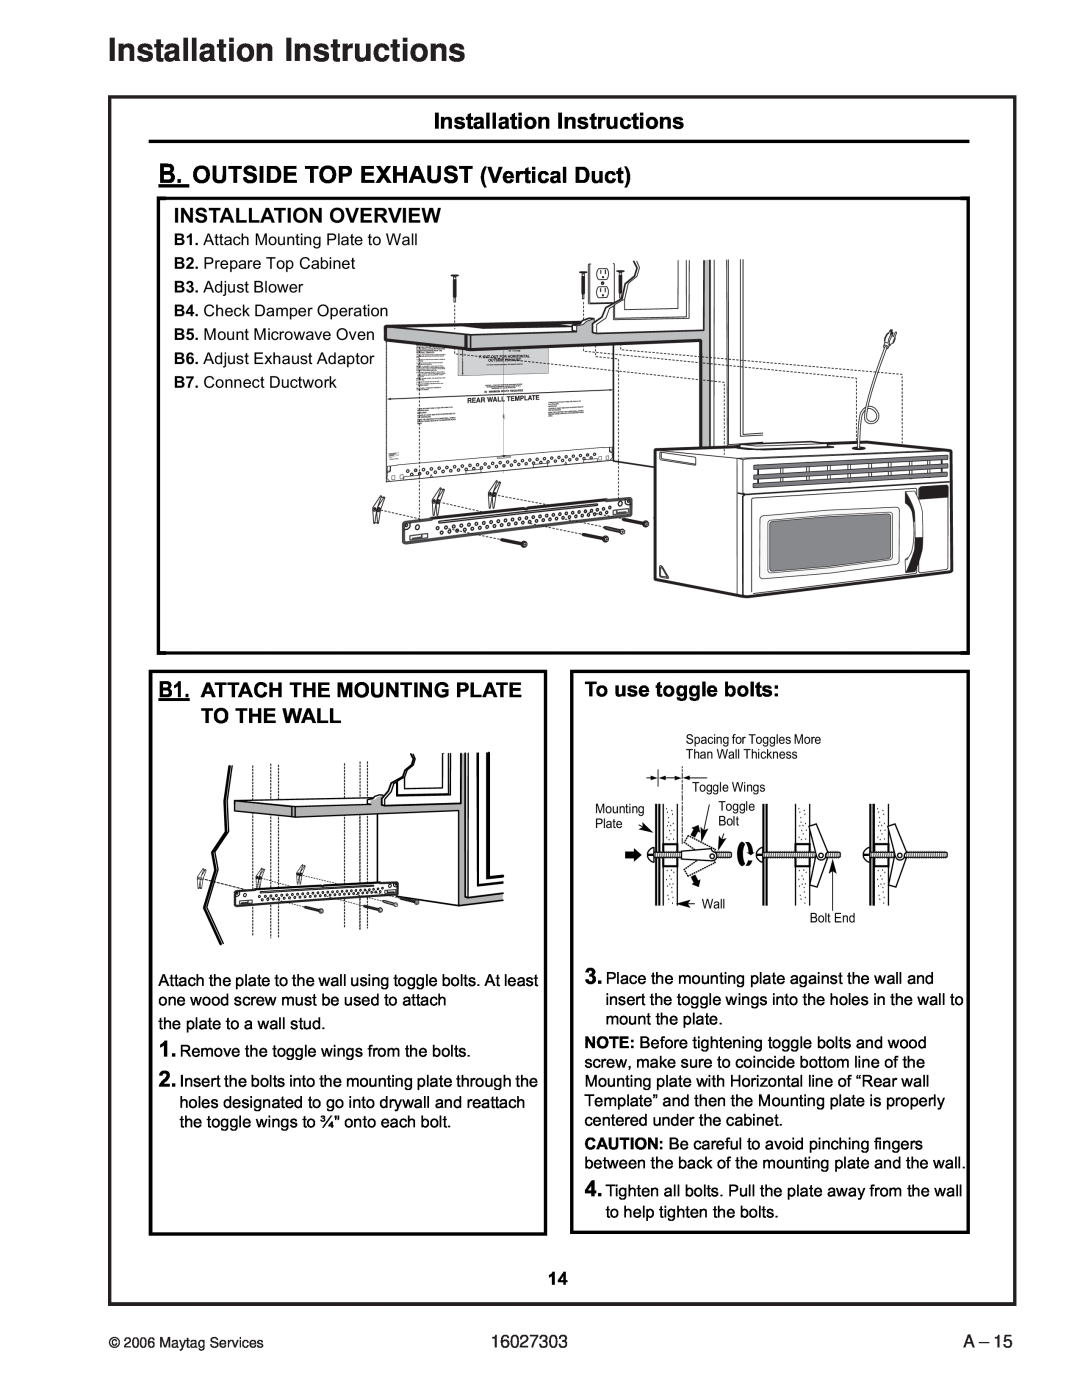 Maytag UMV1152CA B.OUTSIDE TOP EXHAUST Vertical Duct, B1.ATTACH THE MOUNTING PLATE TO THE WALL, Installation Instructions 